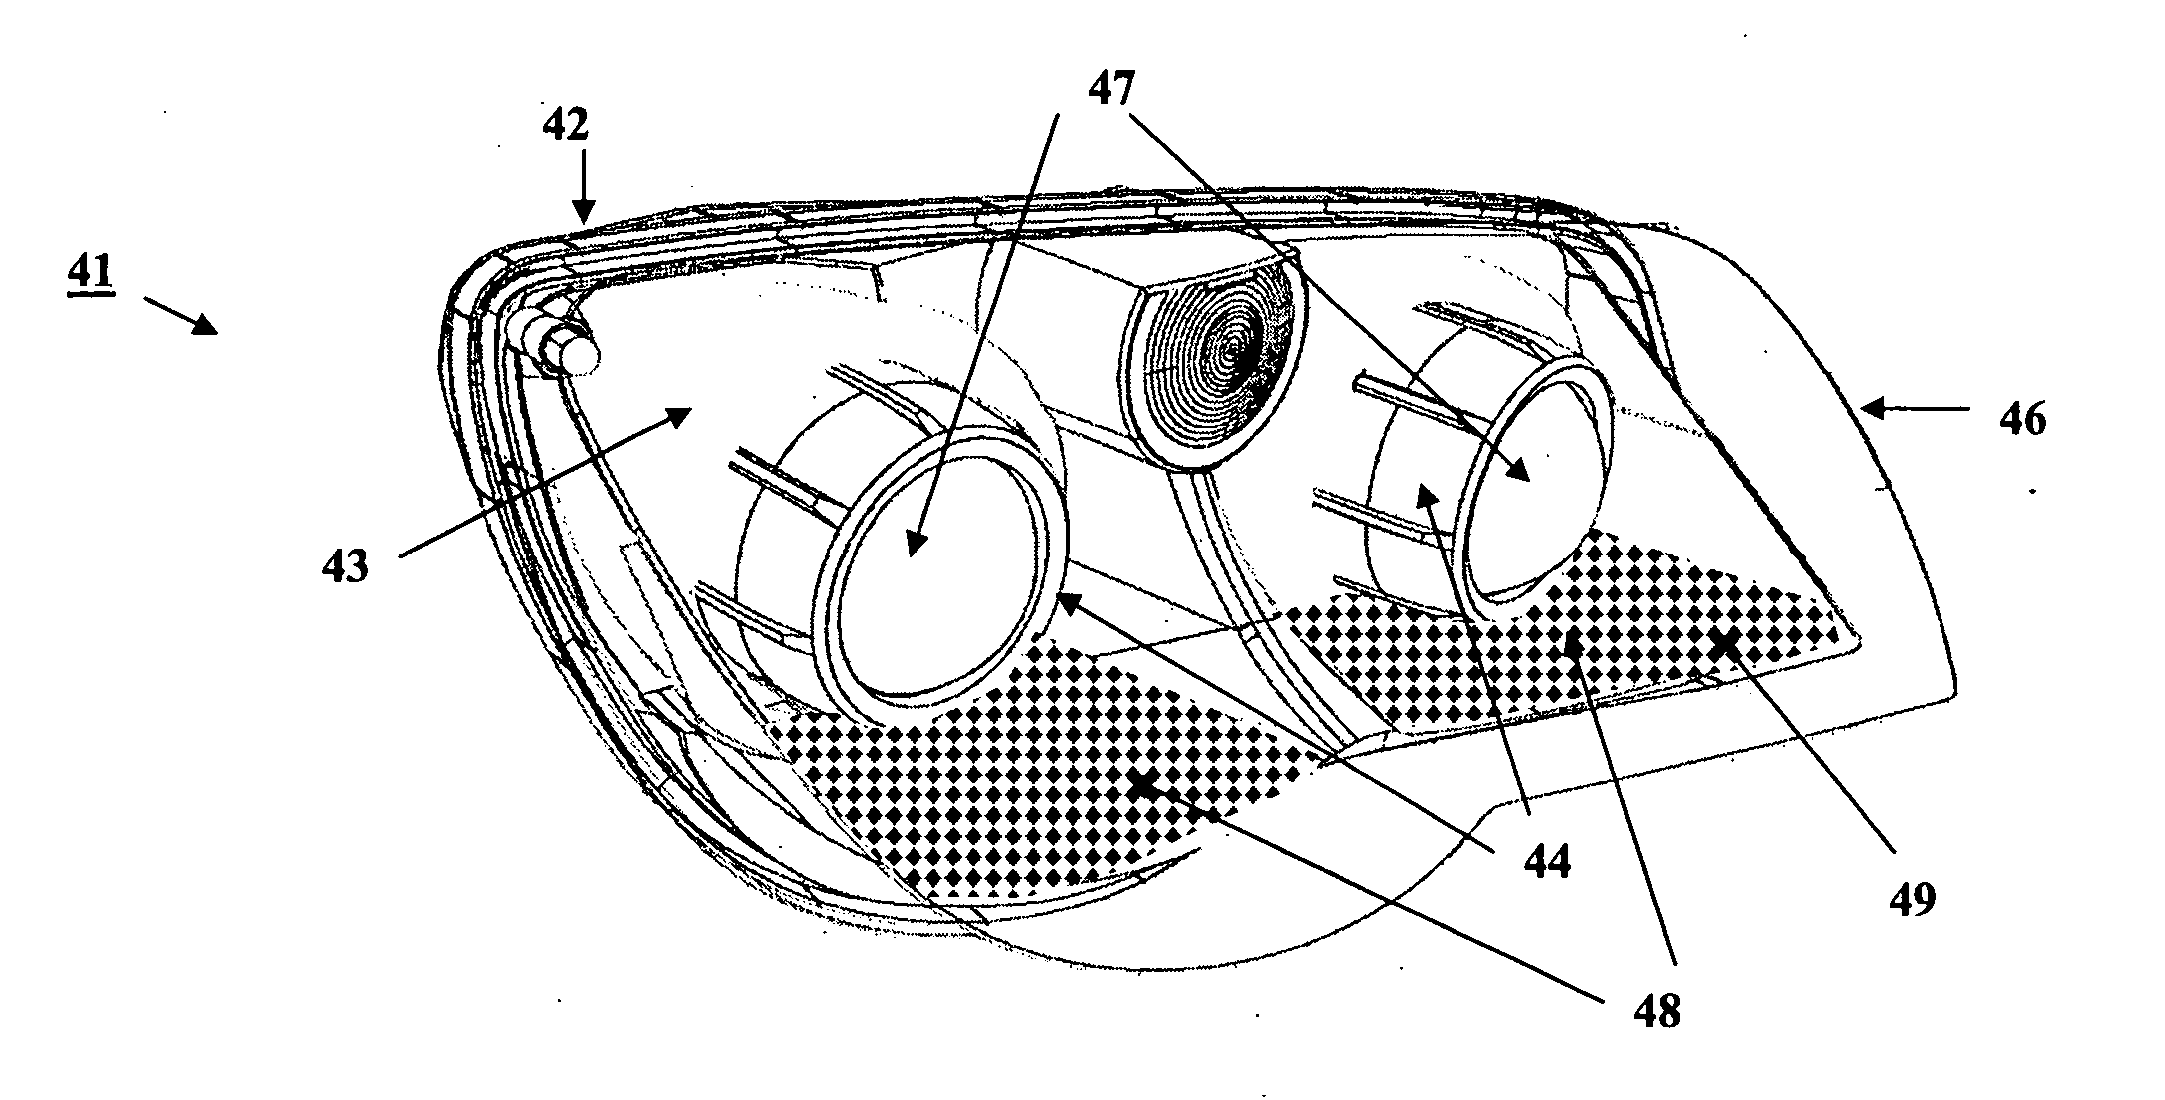 Method of forming a decorative motif on a component of lighting or indicating apparatus for a motor vehicle